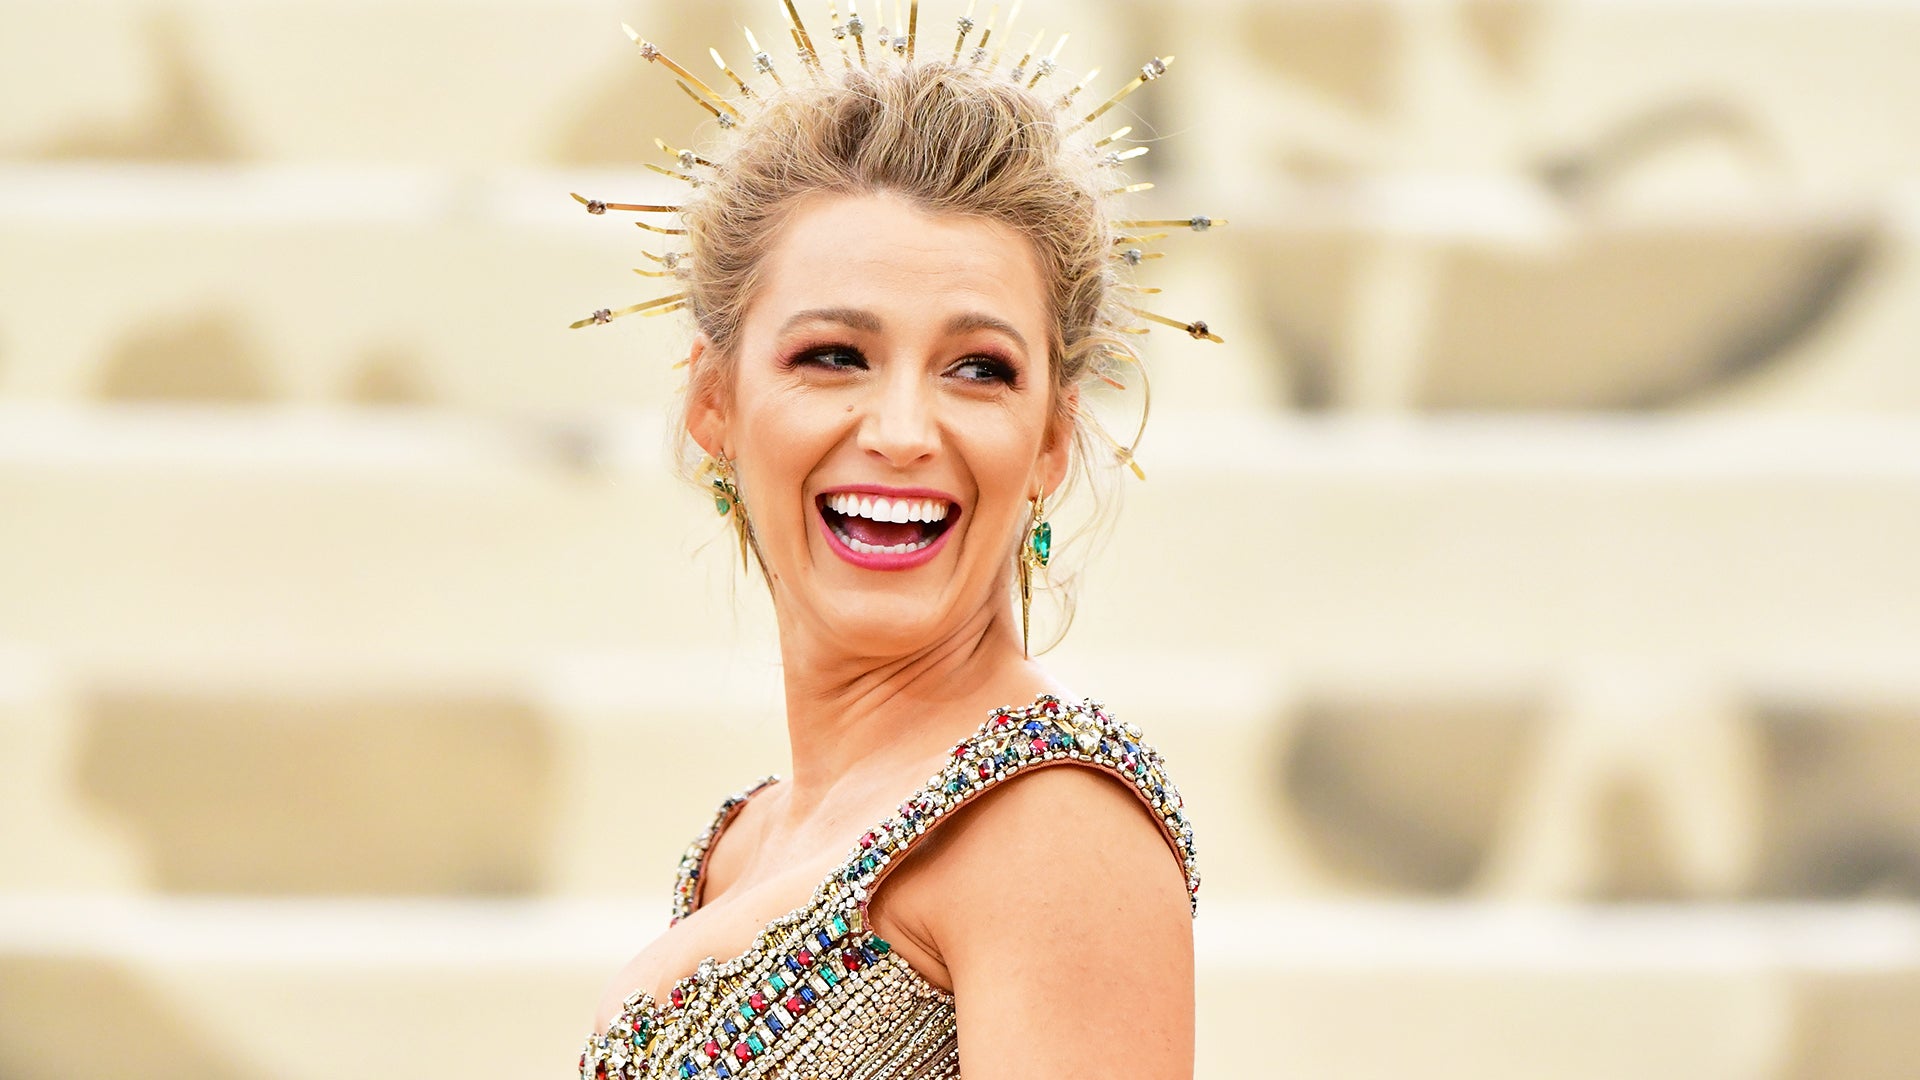 Blake Lively Shares The Rule She and Ryan Reynolds Made When They Got  Together